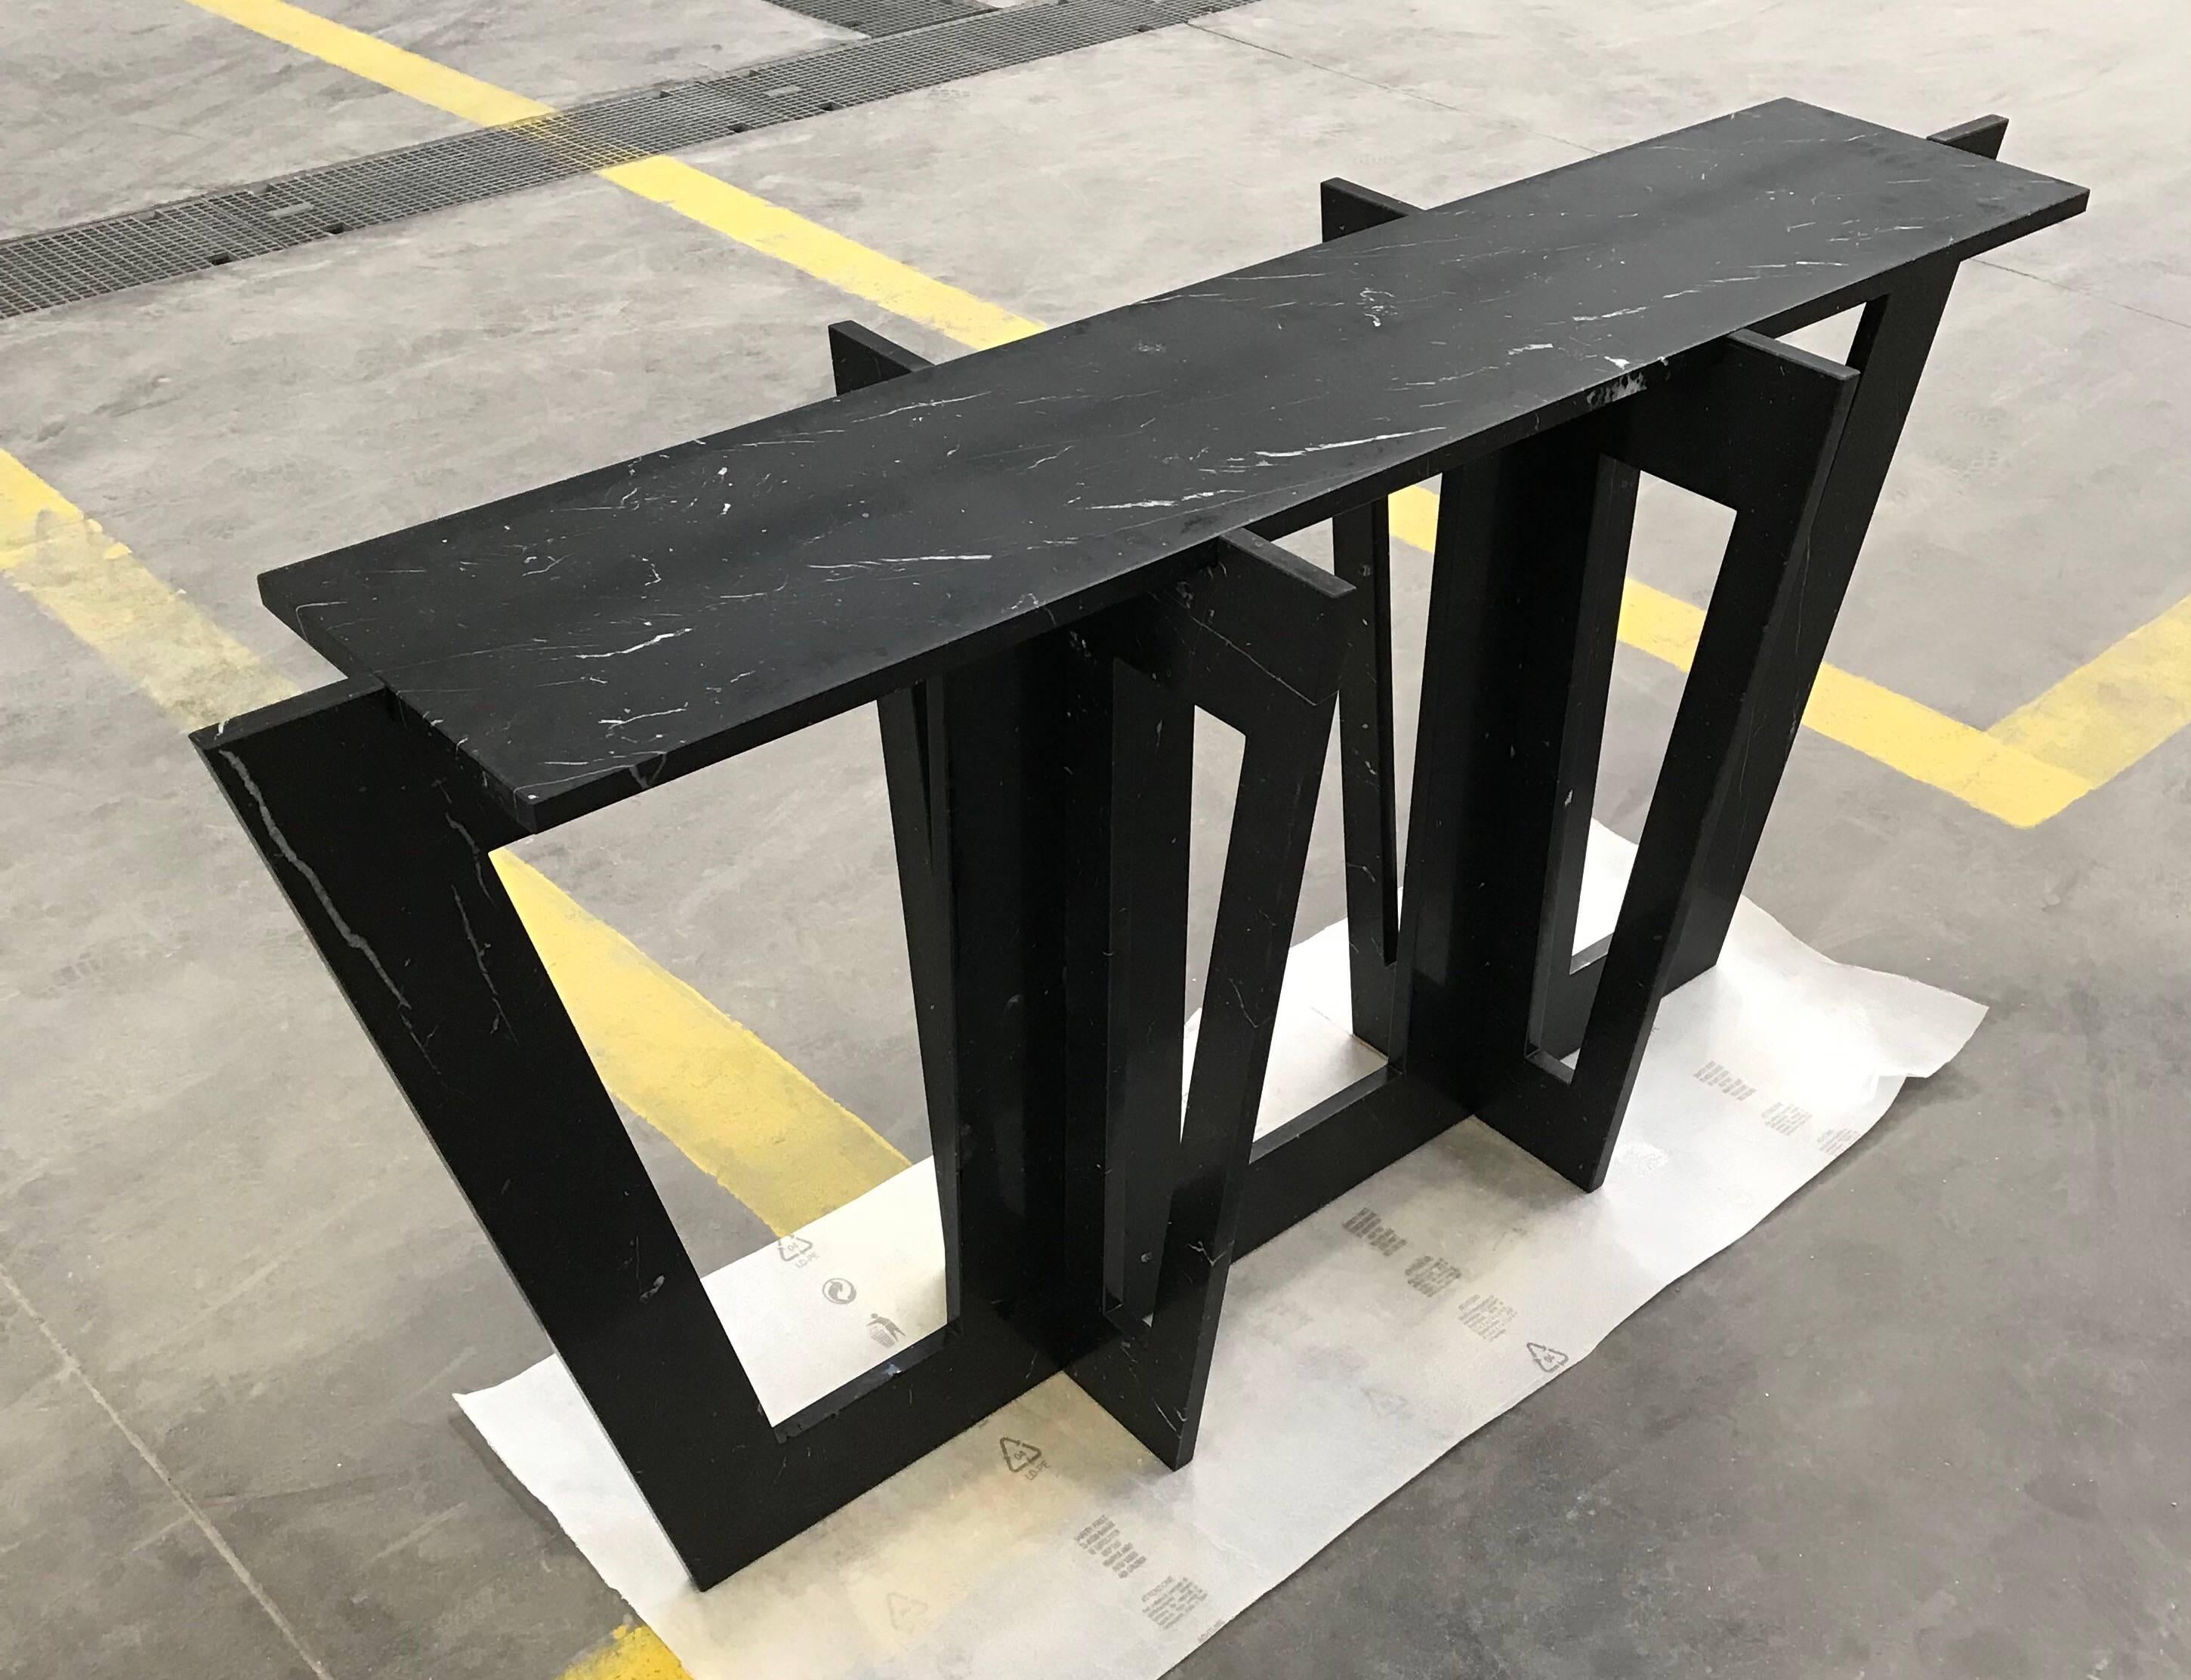 A unique Italian Minimalist Black Marquina marble console or sofa table by Massimo Mangiardi. The black marble rectangular top rests on three inter-stacked open frame black marble parts which creates the frame. Available also in white Carrara